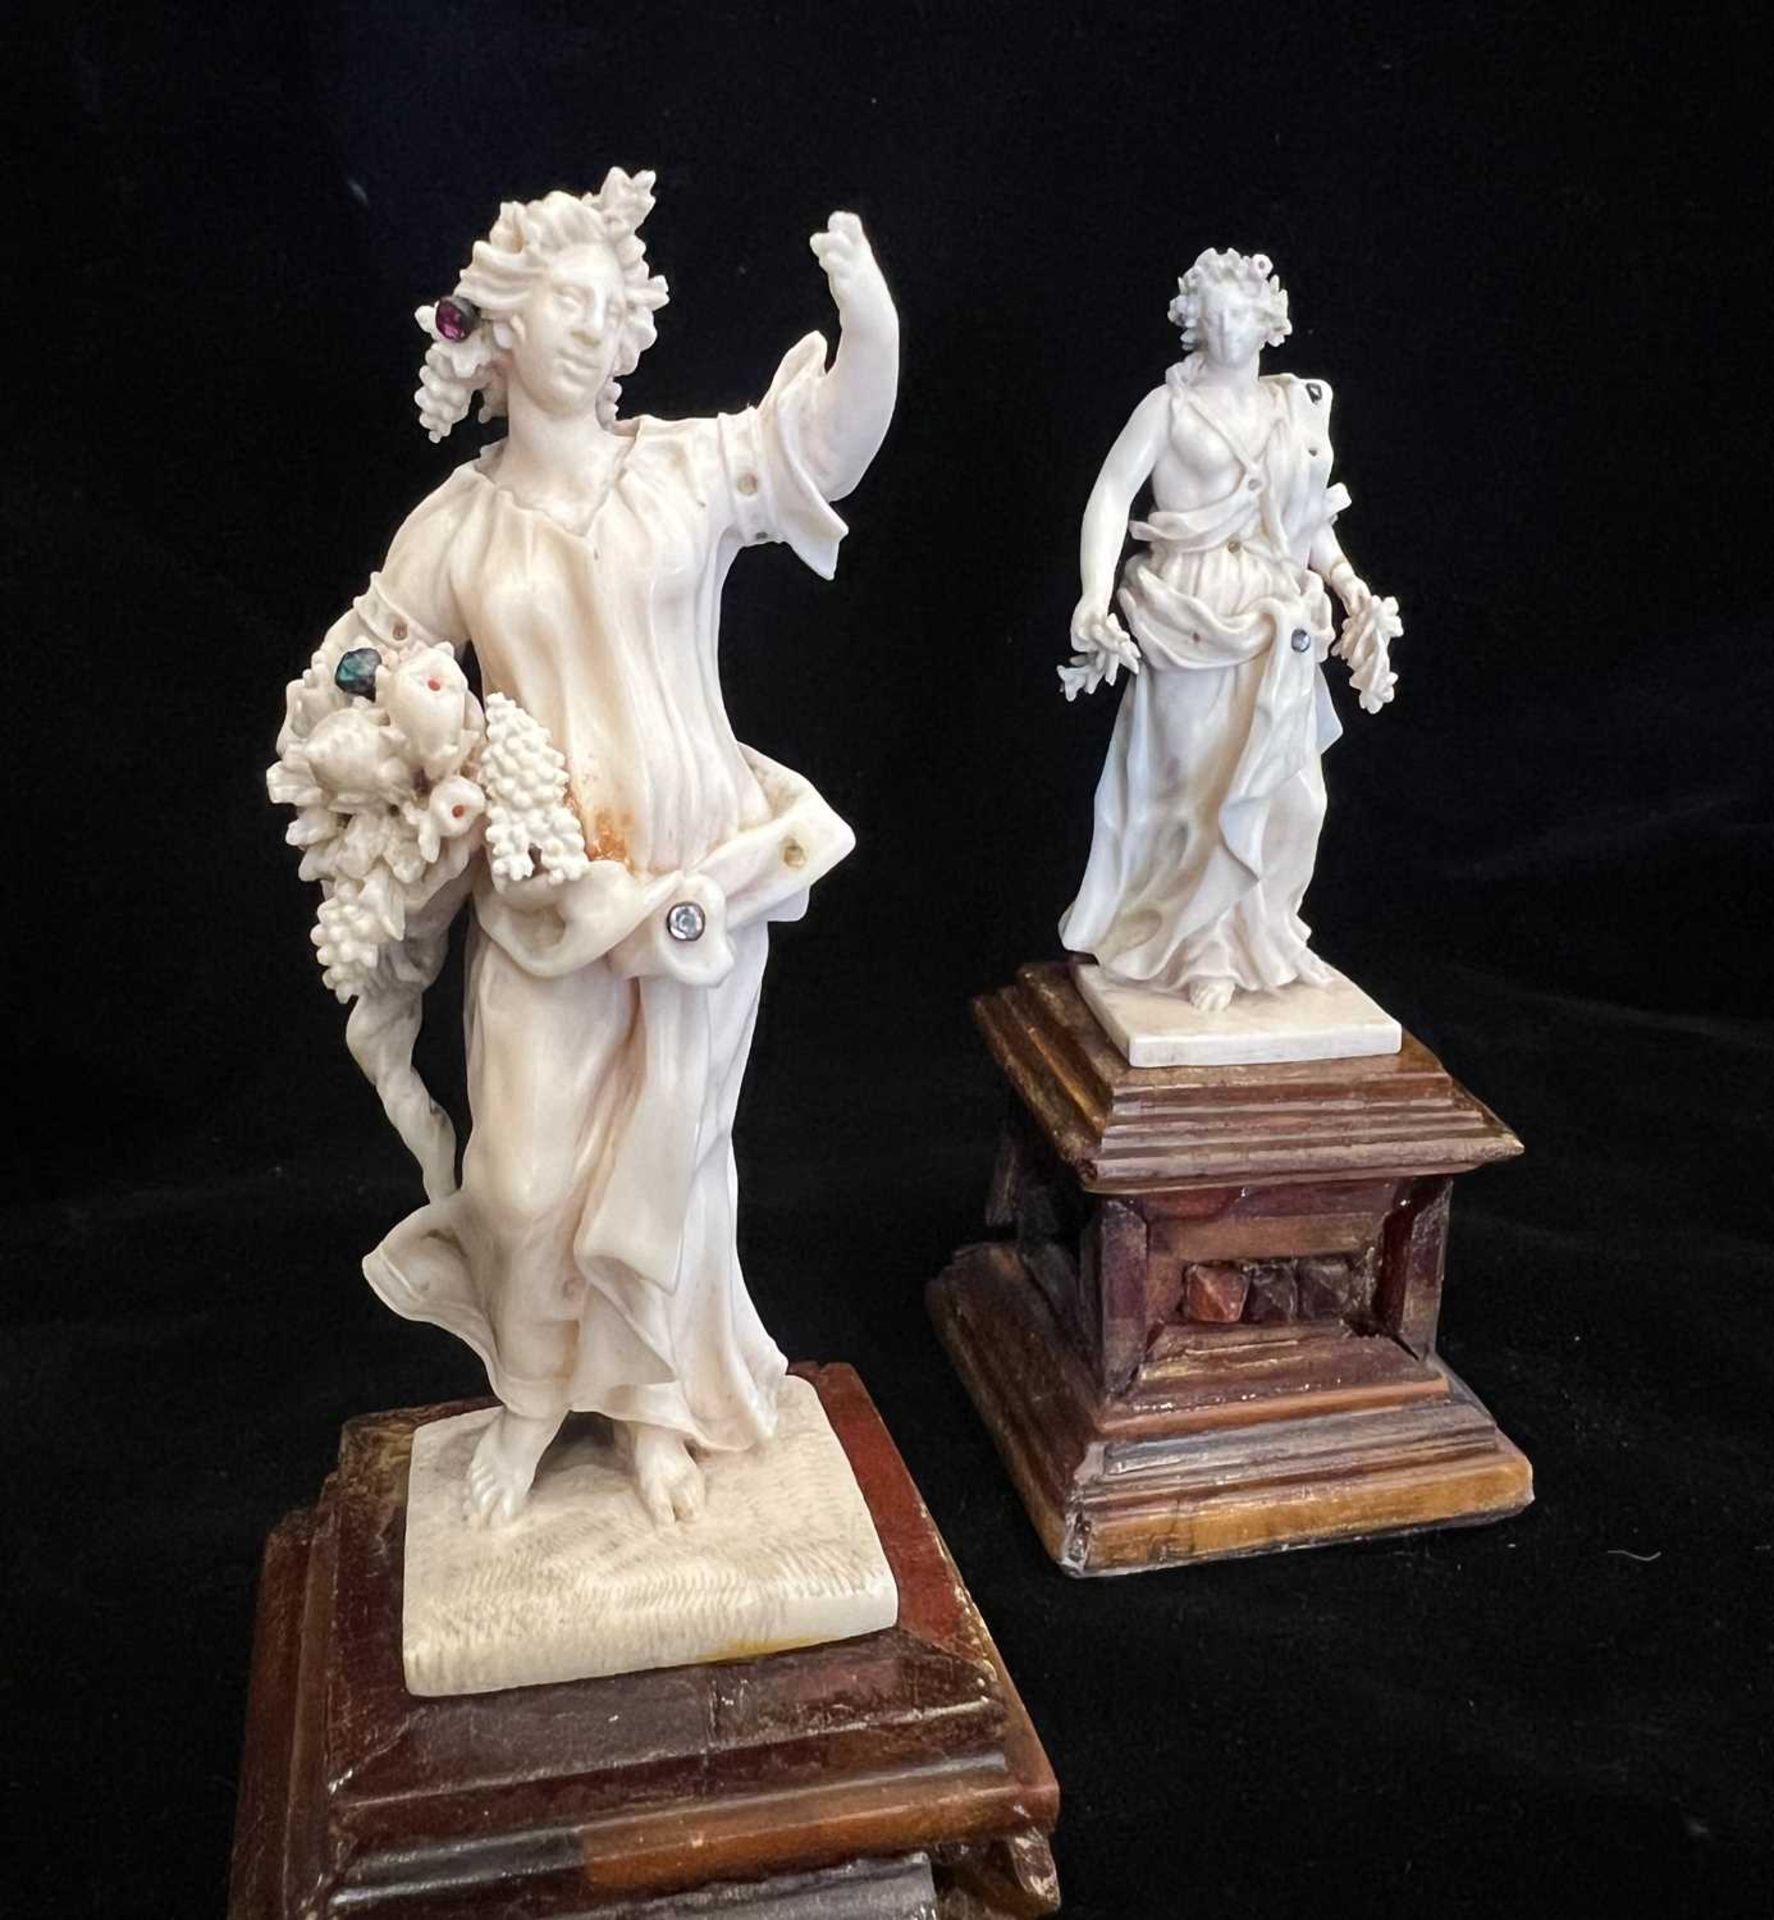 H.R.H PRINCESS MARGARET'S WEDDING GIFT: A PAIR OF 18TH CENTURY IVORY FIGURES OF SPRING AND AUTUMN - Image 3 of 14